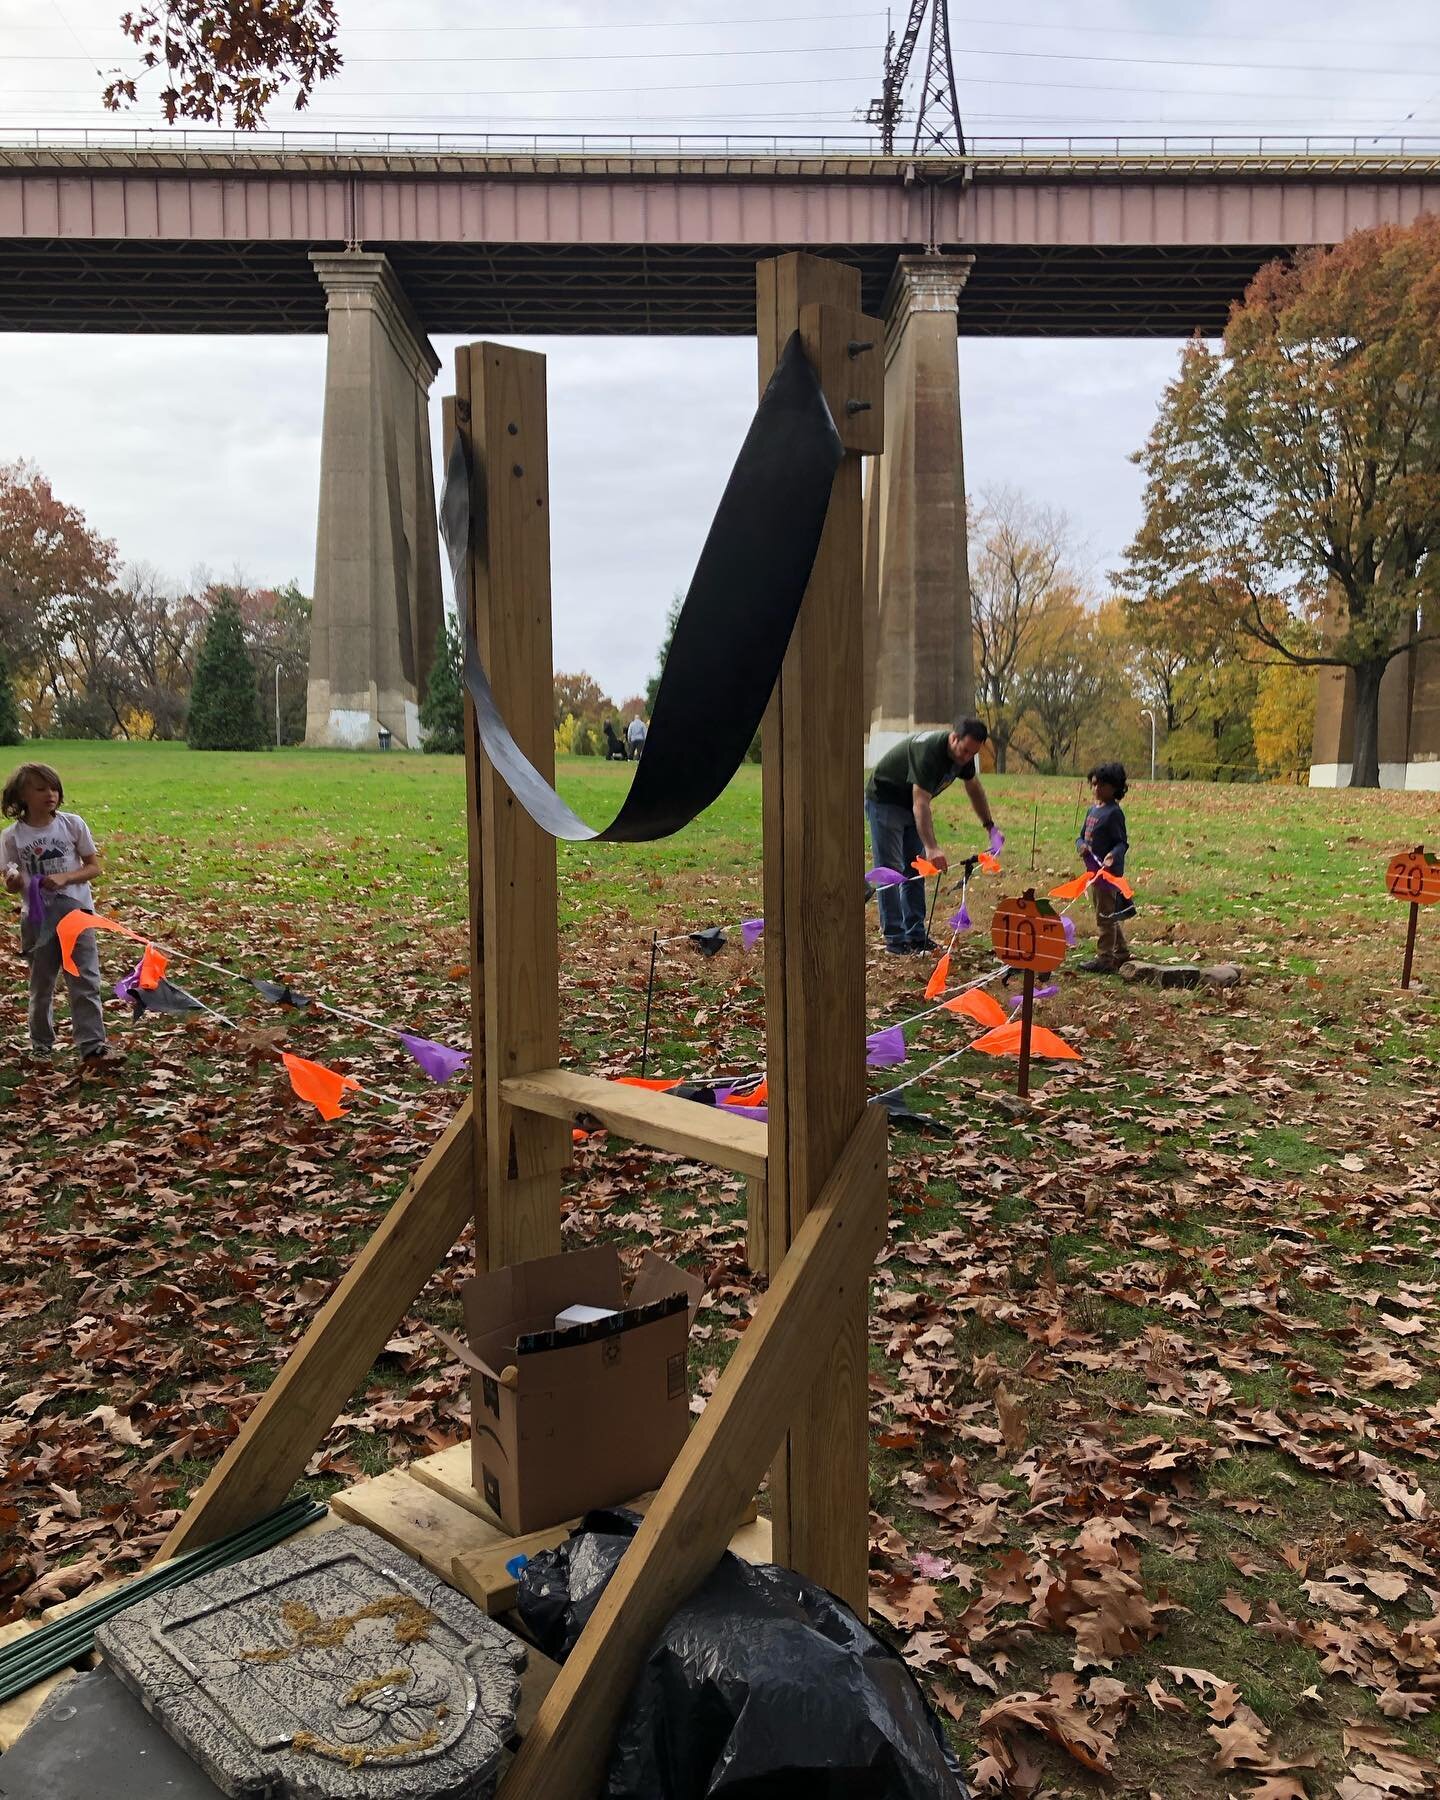 The @astoriaparkalliance Annual #PumpkinSmash is in FULL SWING! 

Crack it with catapult and smash it with the mallet!
@astoriawoodworkers @bigreuse #AstoriaPark 

Today (11/6) from 11-12:30pm on Ditmars and 19th.  You won&rsquo;t miss us!